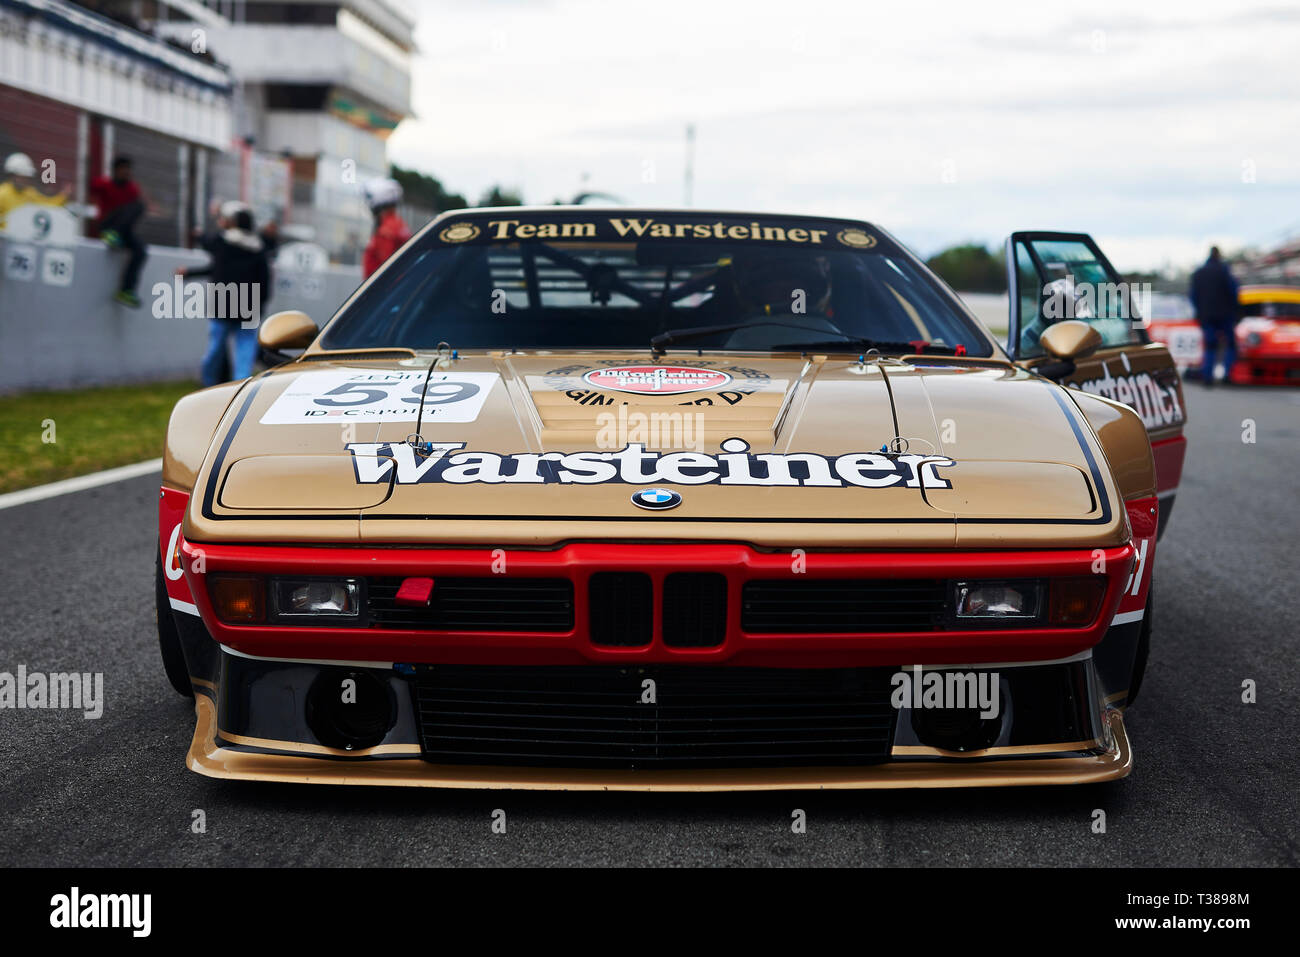 Bmw M1 Procar High Resolution Stock Photography and Images - Alamy